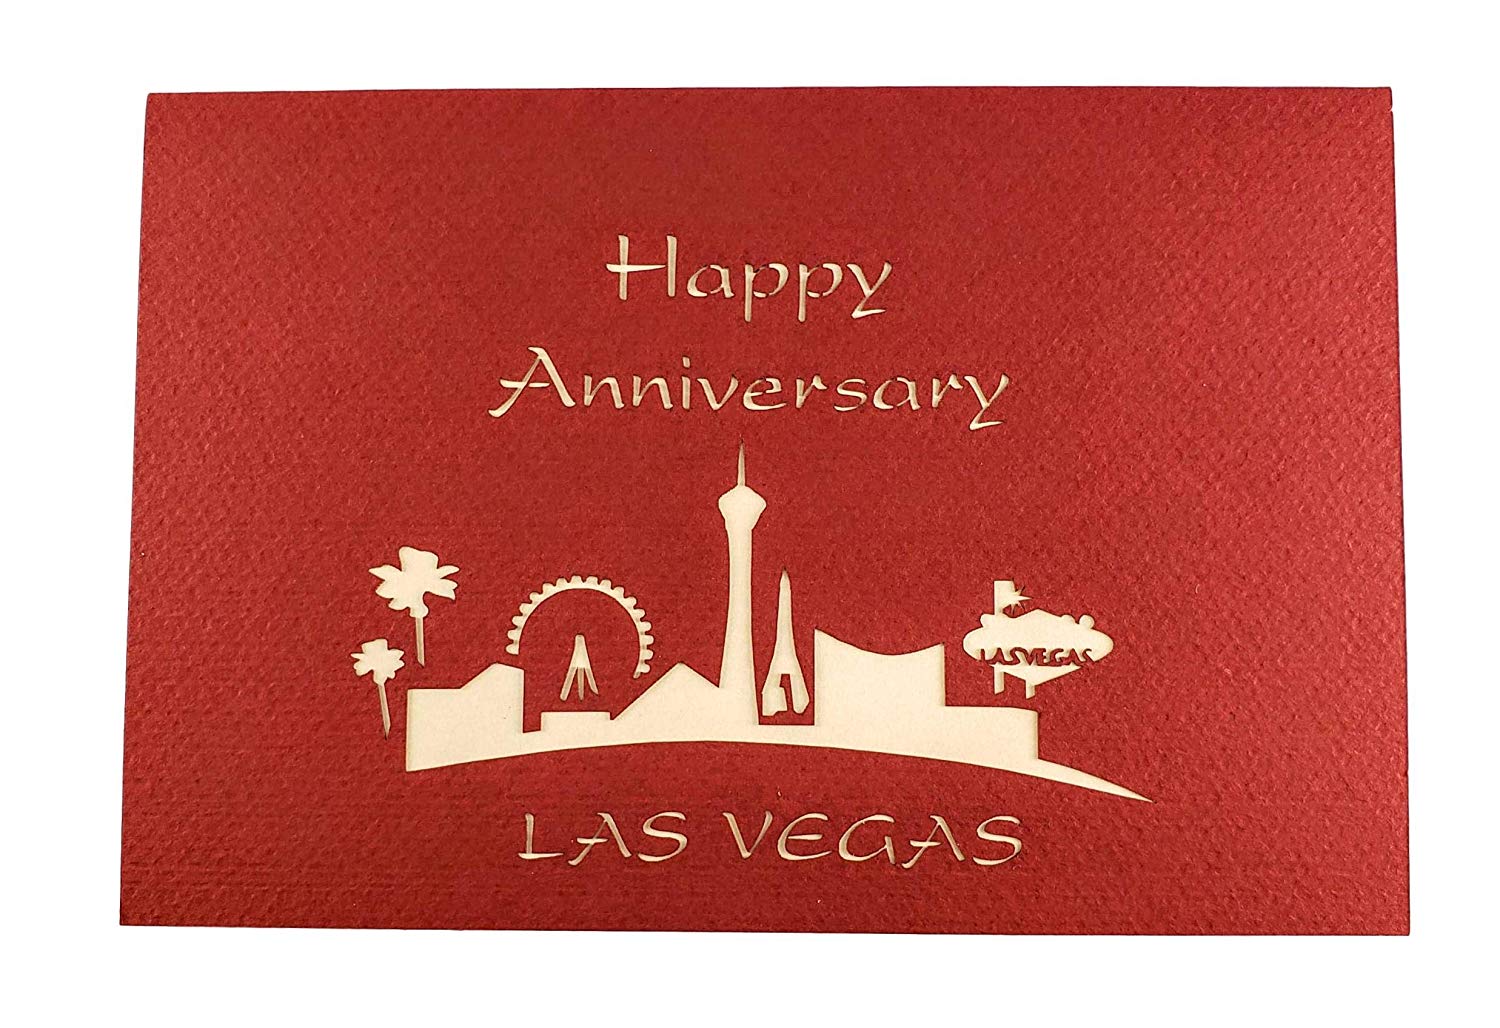 Happy Anniversary Las Vegas 3D Pop Up Greeting Card - Anniversary - iGifts And Cards